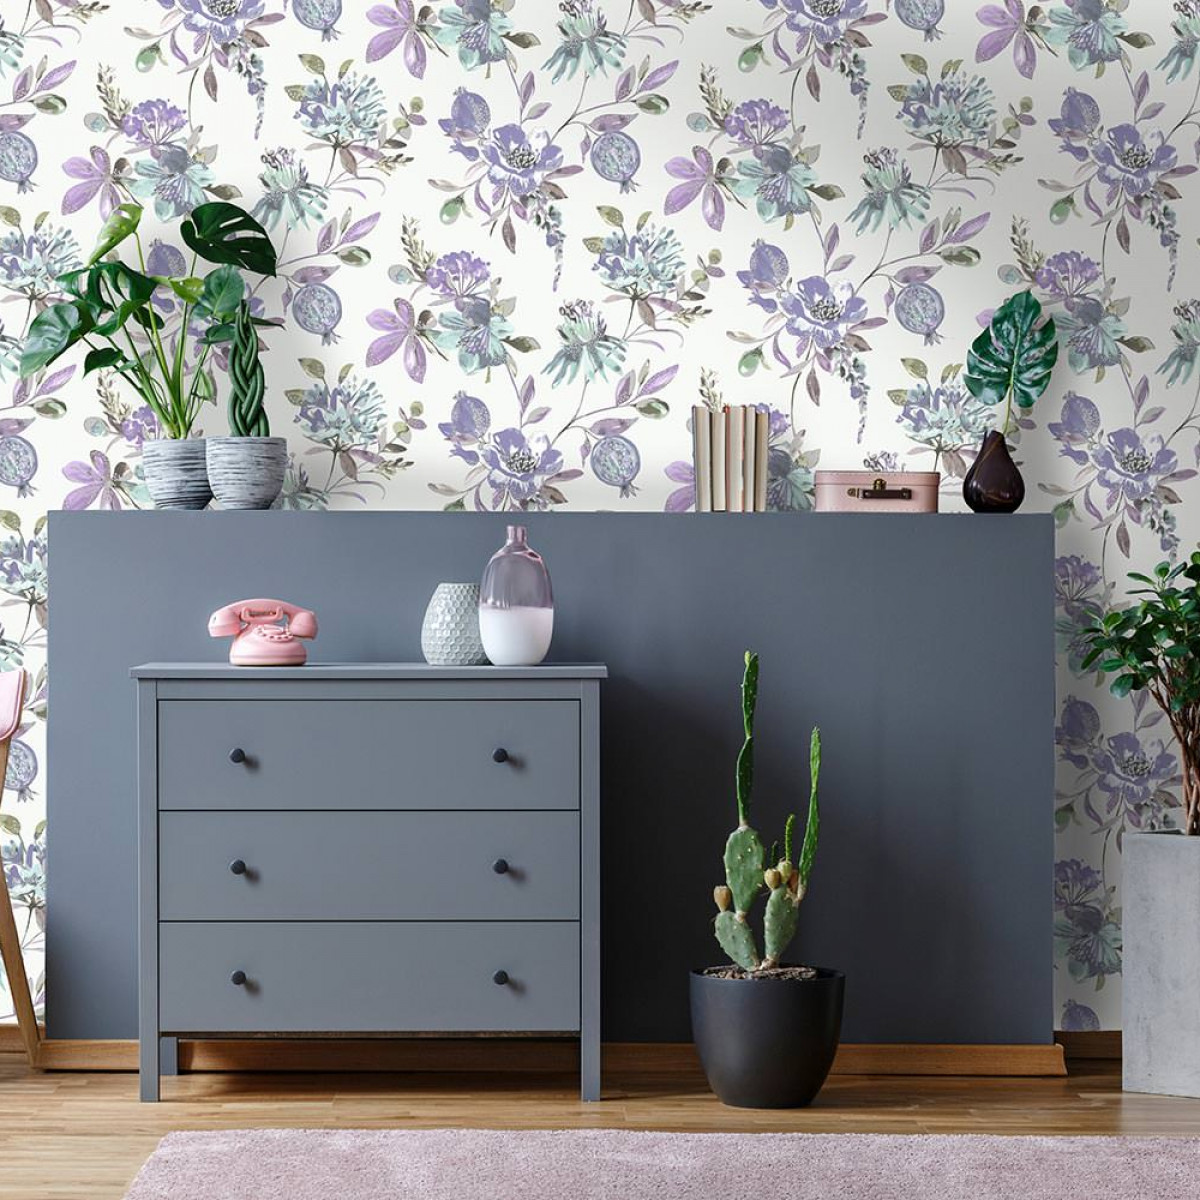 6 floral wallpaper designs that will almost convince you it’s spring ...